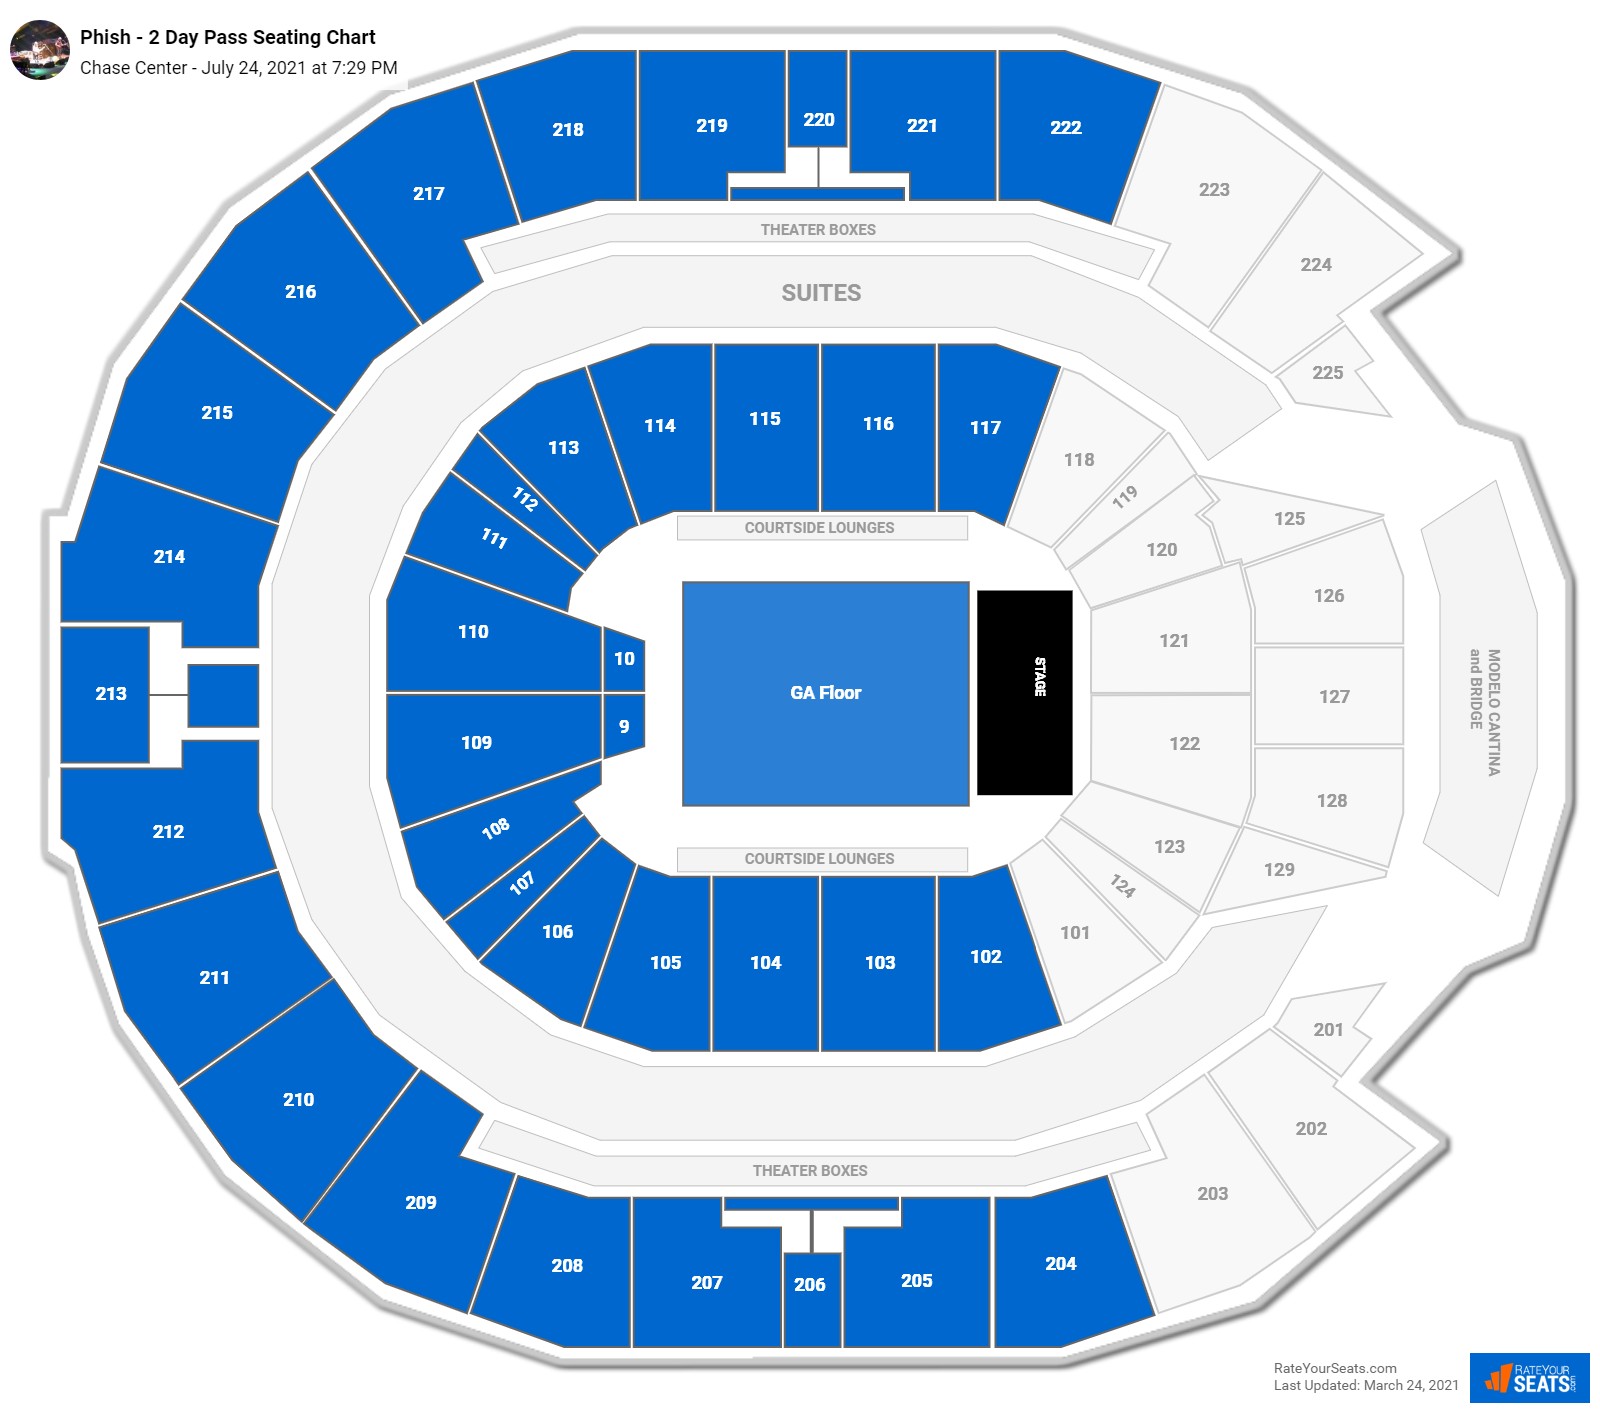 Chase Center Seating Charts for Concerts